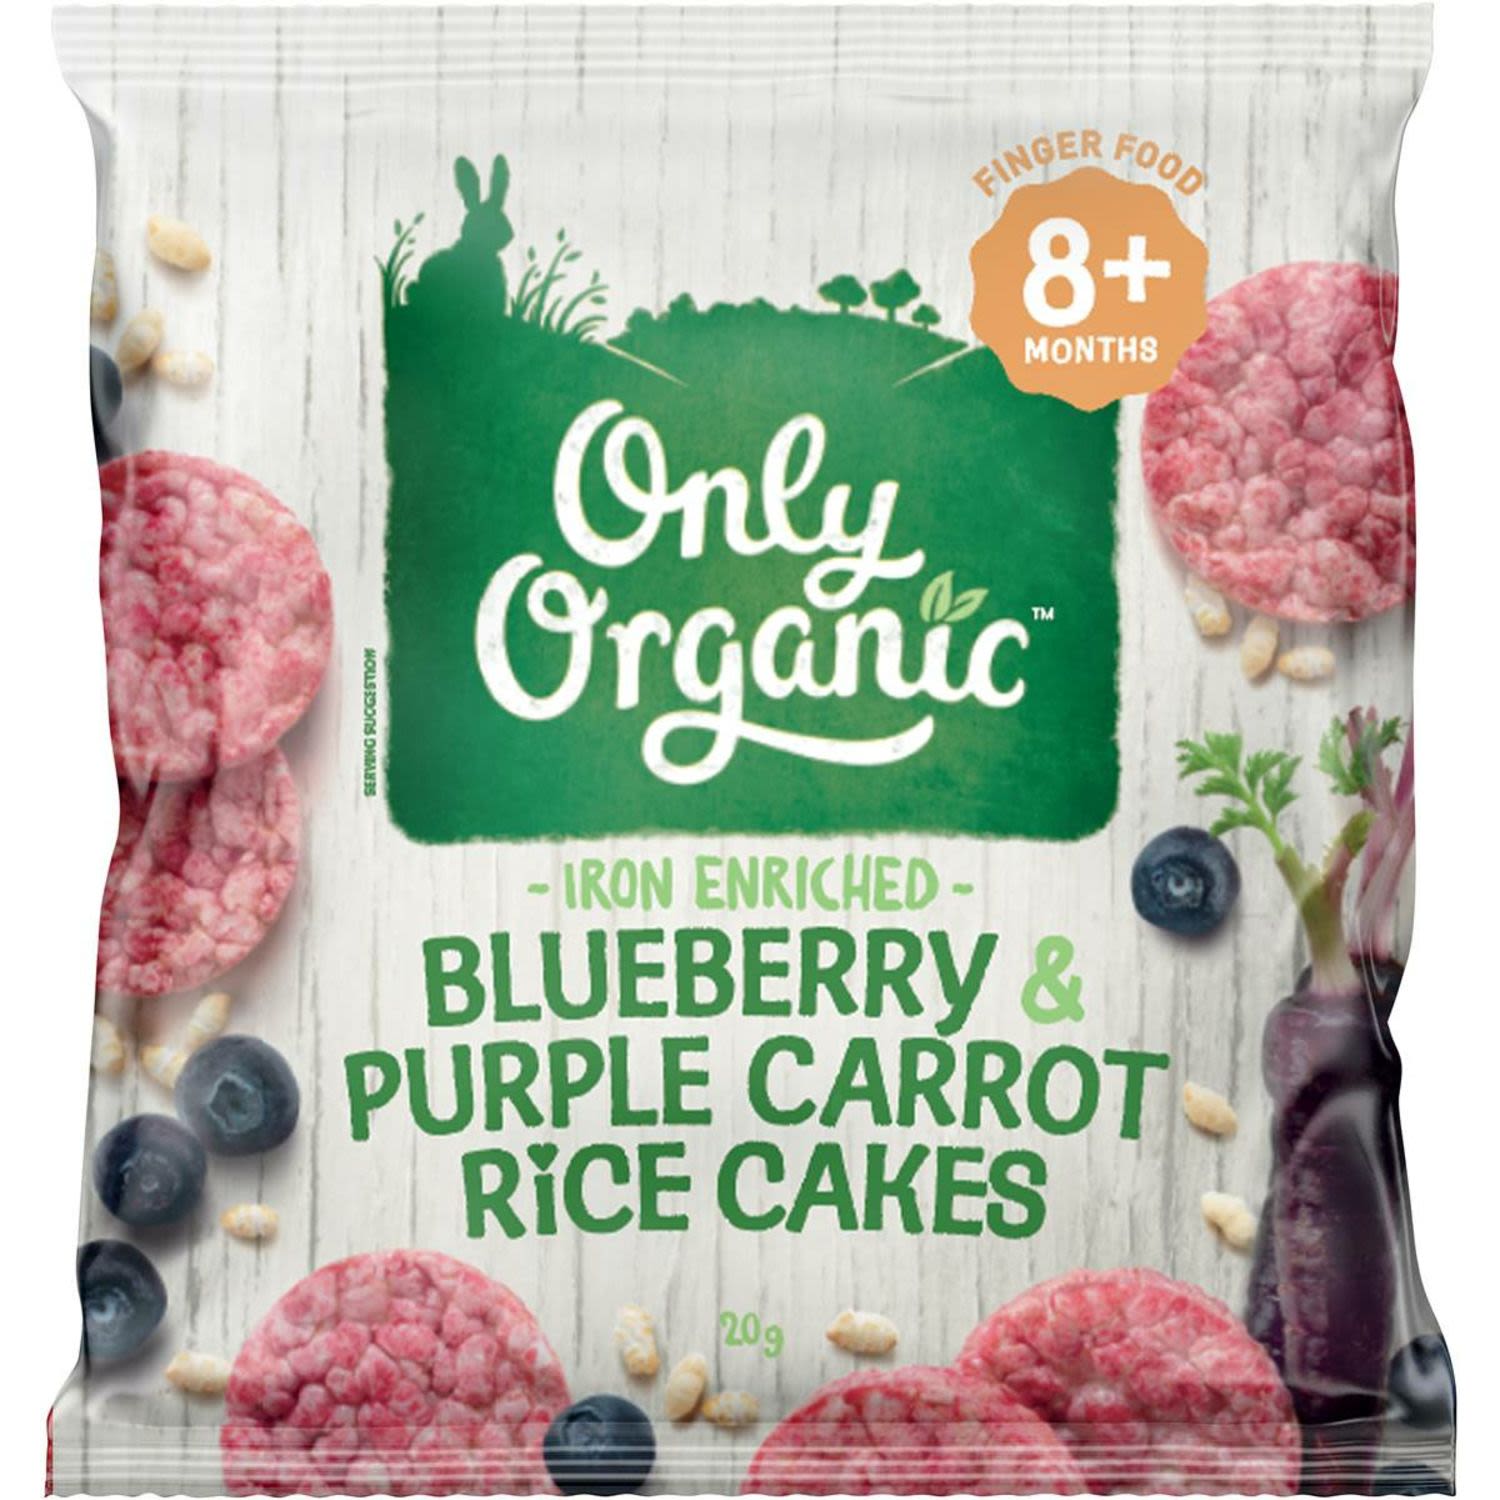 Only Organic Blueberry & Purple Carrot Rice Cakes 8+ Months, 20 Gram